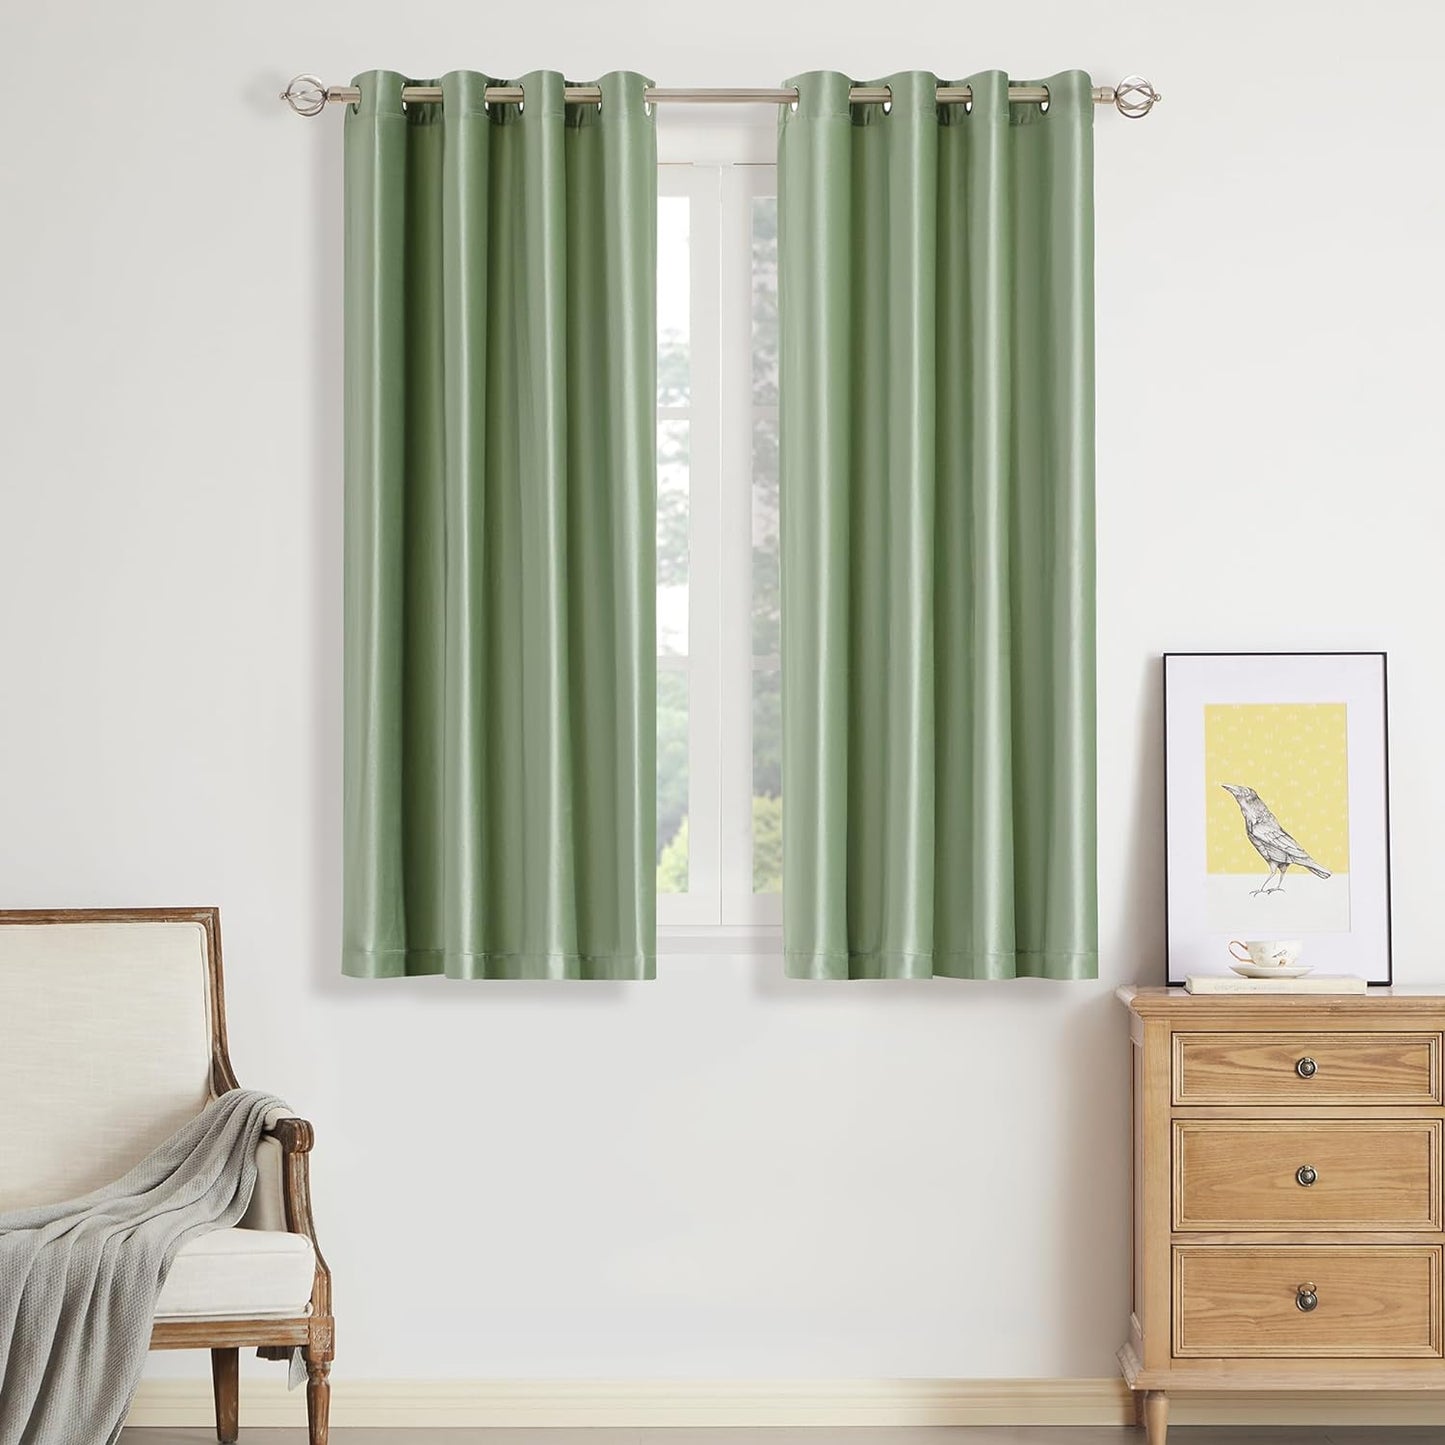 BULBUL Living Room Velvet Window Curtains 84 Inch Length- 2 Panels Hot Pink Blackout Window Drapes Curtains Thermal Insulated Room Darkening Decor Grommet Curtains for Bedroom  BULBUL Sage Green 52"W X 63"L 